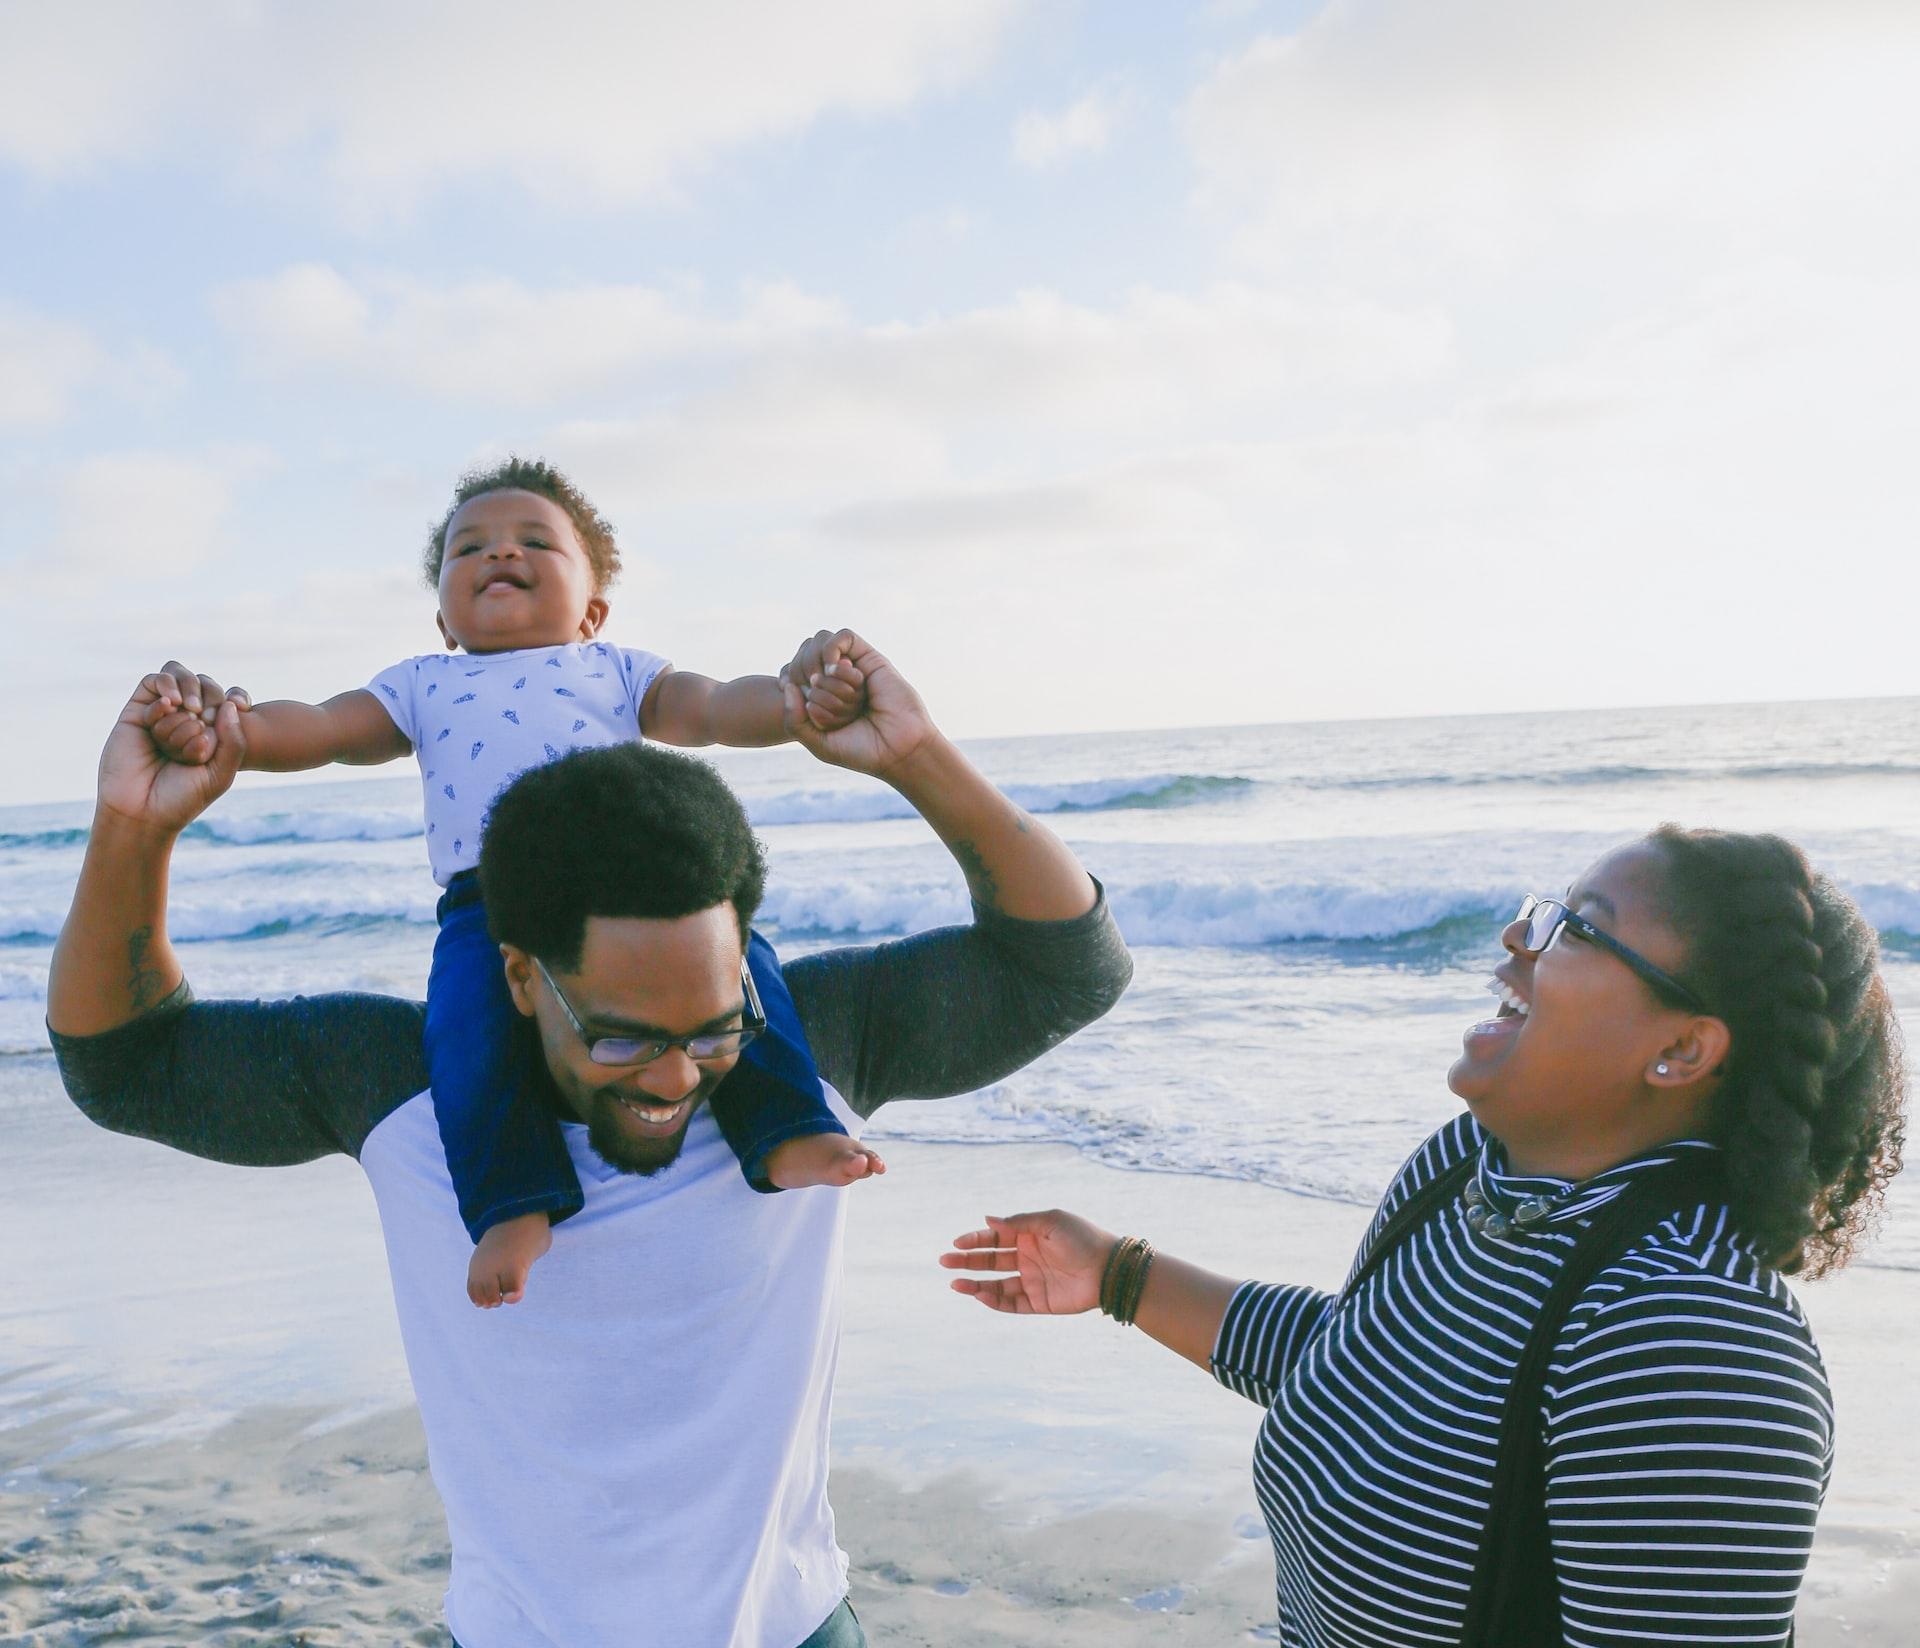 A Black man and his wife, a Black woman, are laughing as they're playing with their toddler who is sitting on the man's shoulders with the man holding the toddler's hands. They are at the beach, it's a sunny day with clouds in the sky and the shoreline is visible in the background.